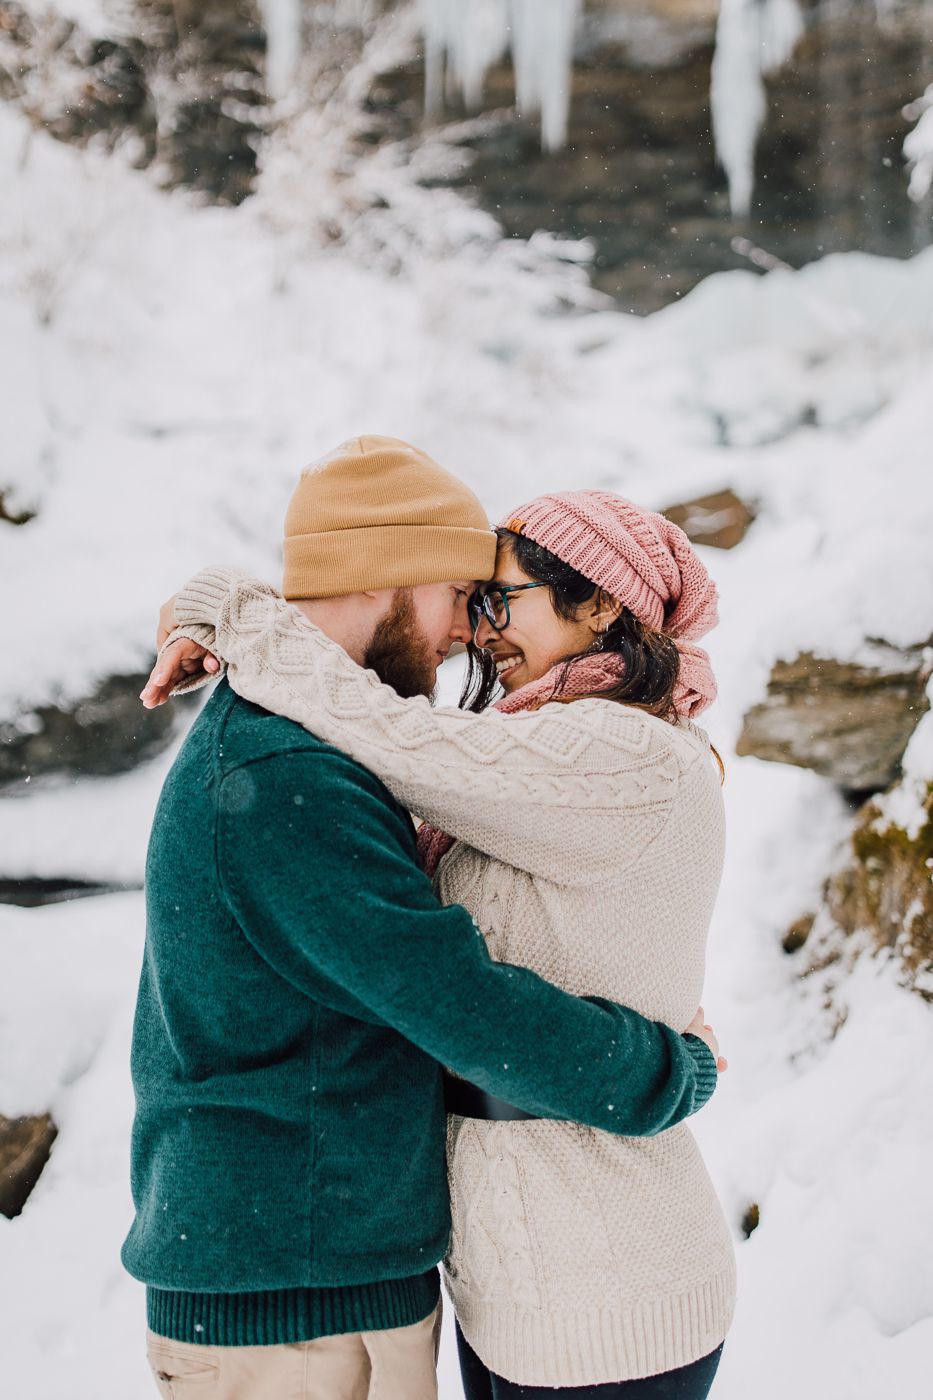  Engaged couple embraces while taking winter wonderland photos with Brittany Juravich at Tinker Falls 